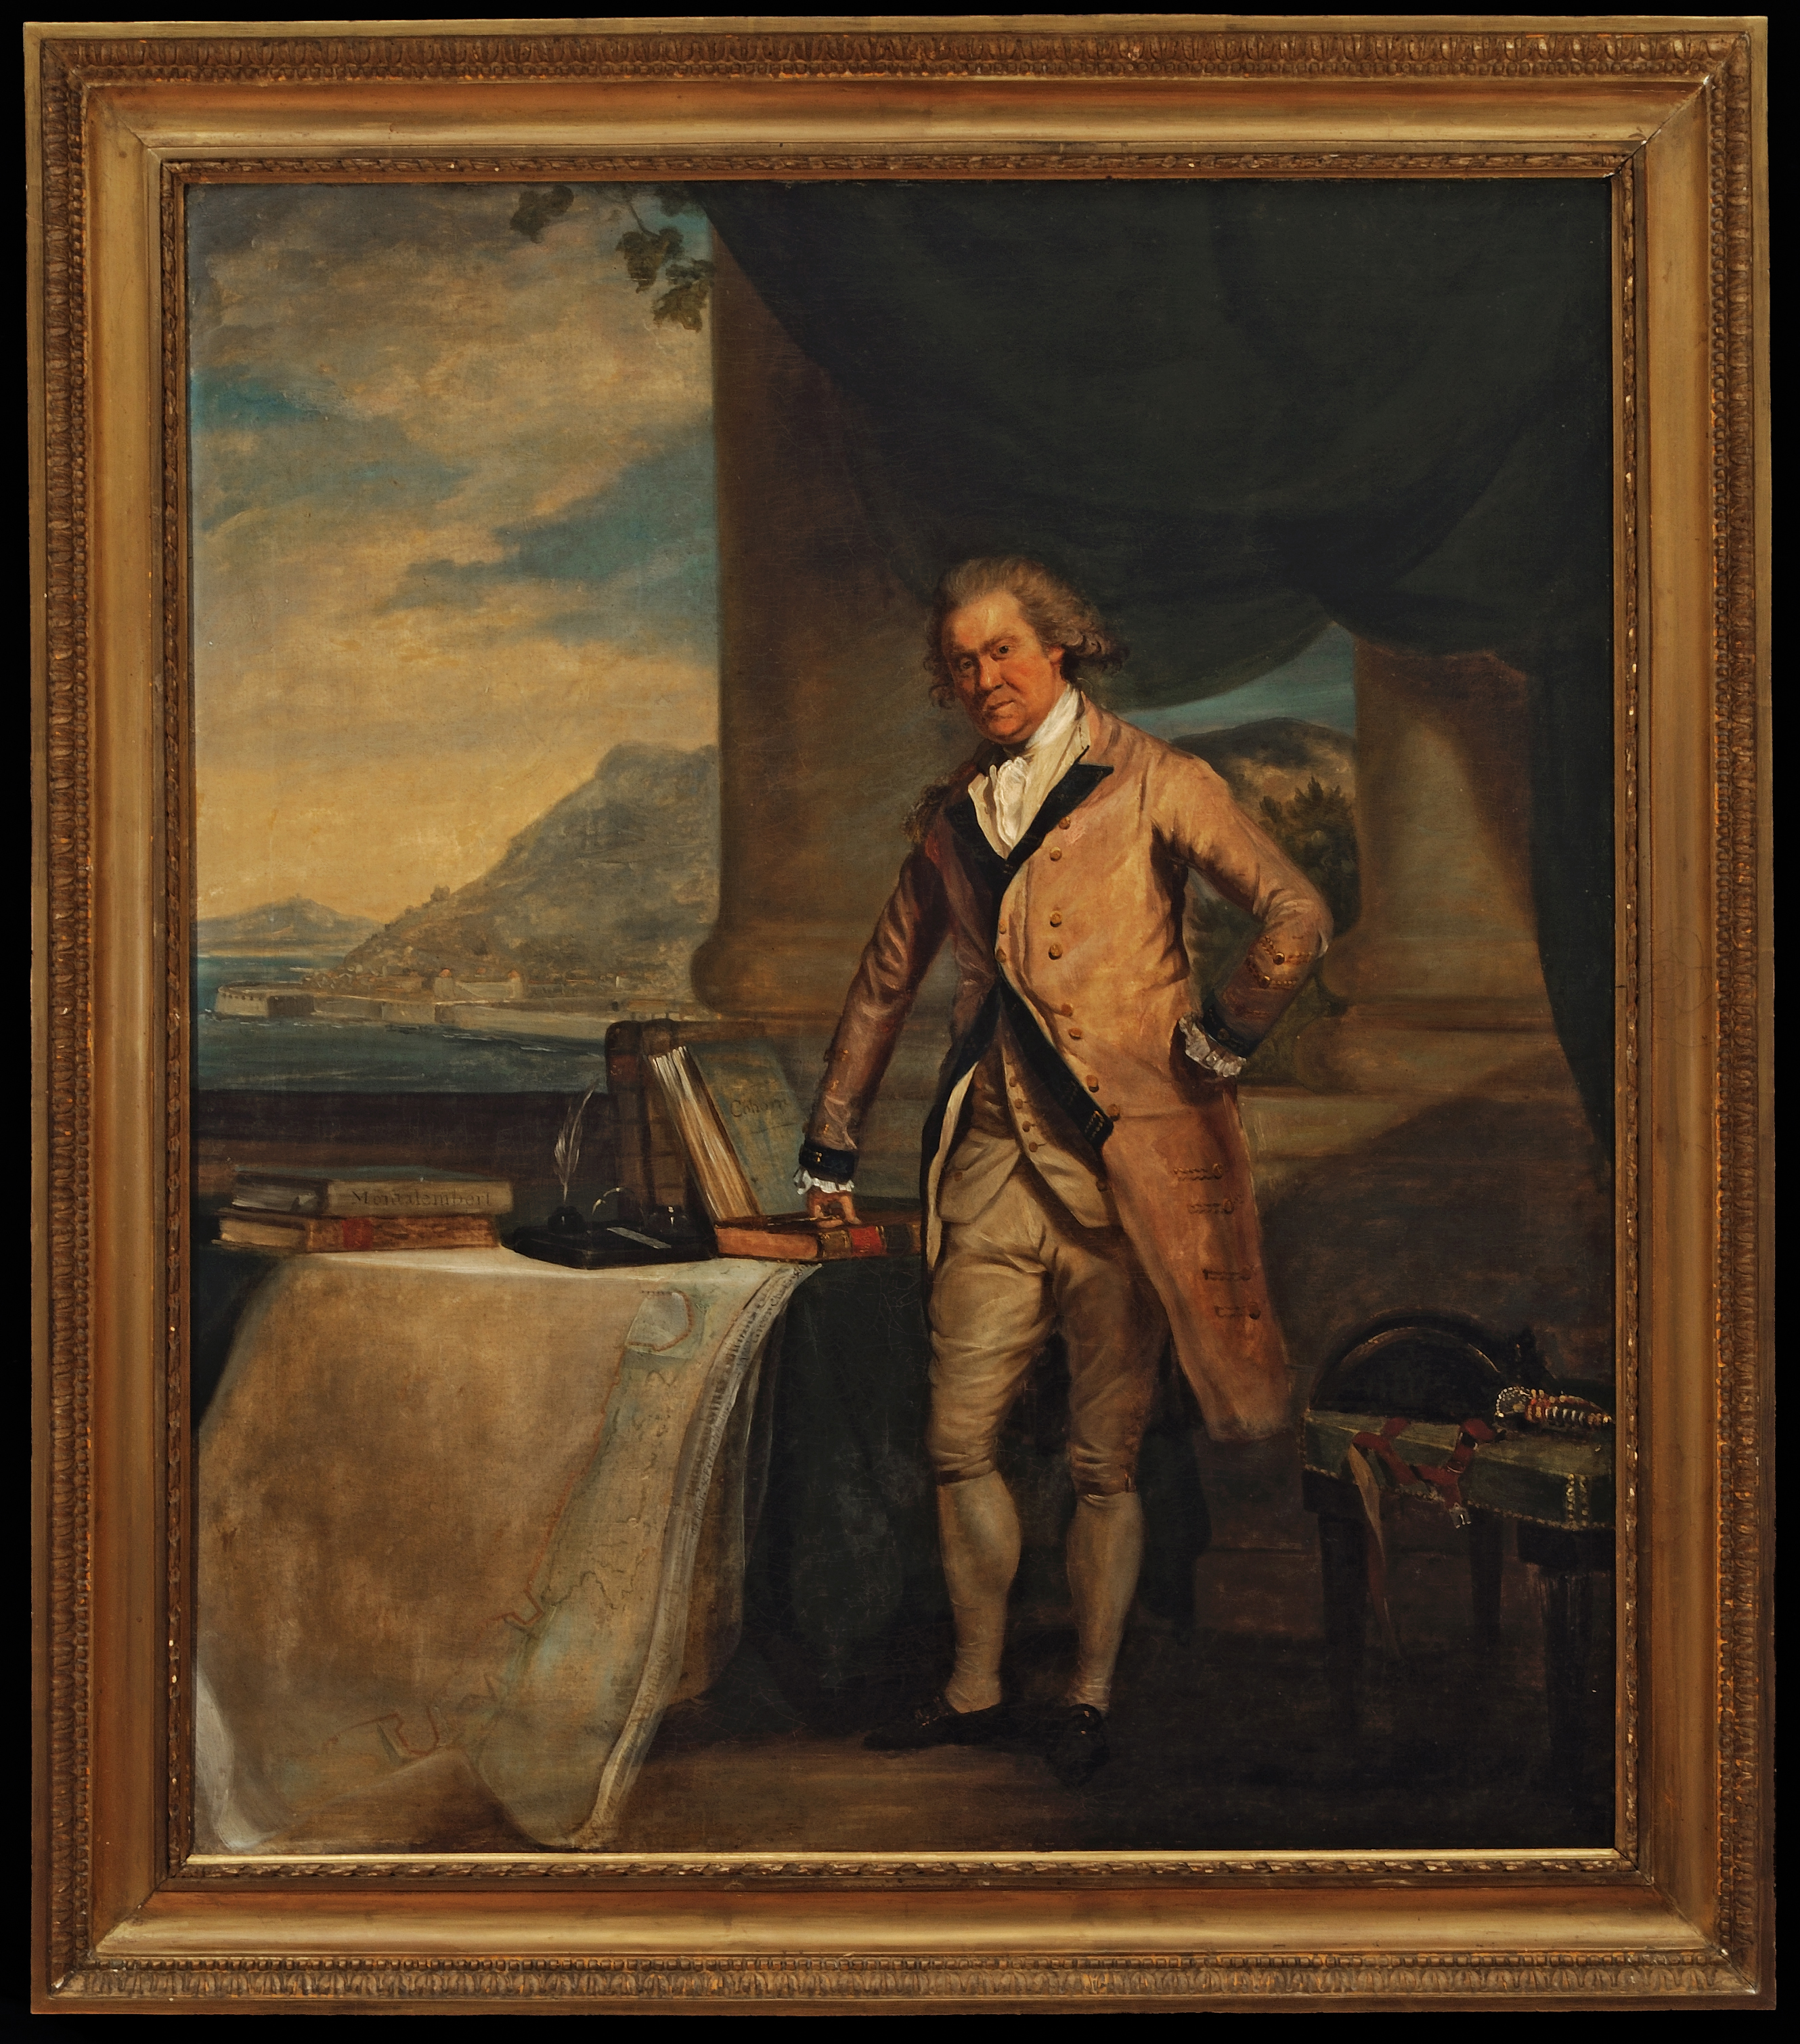 William Green by Carter, ca. 1784